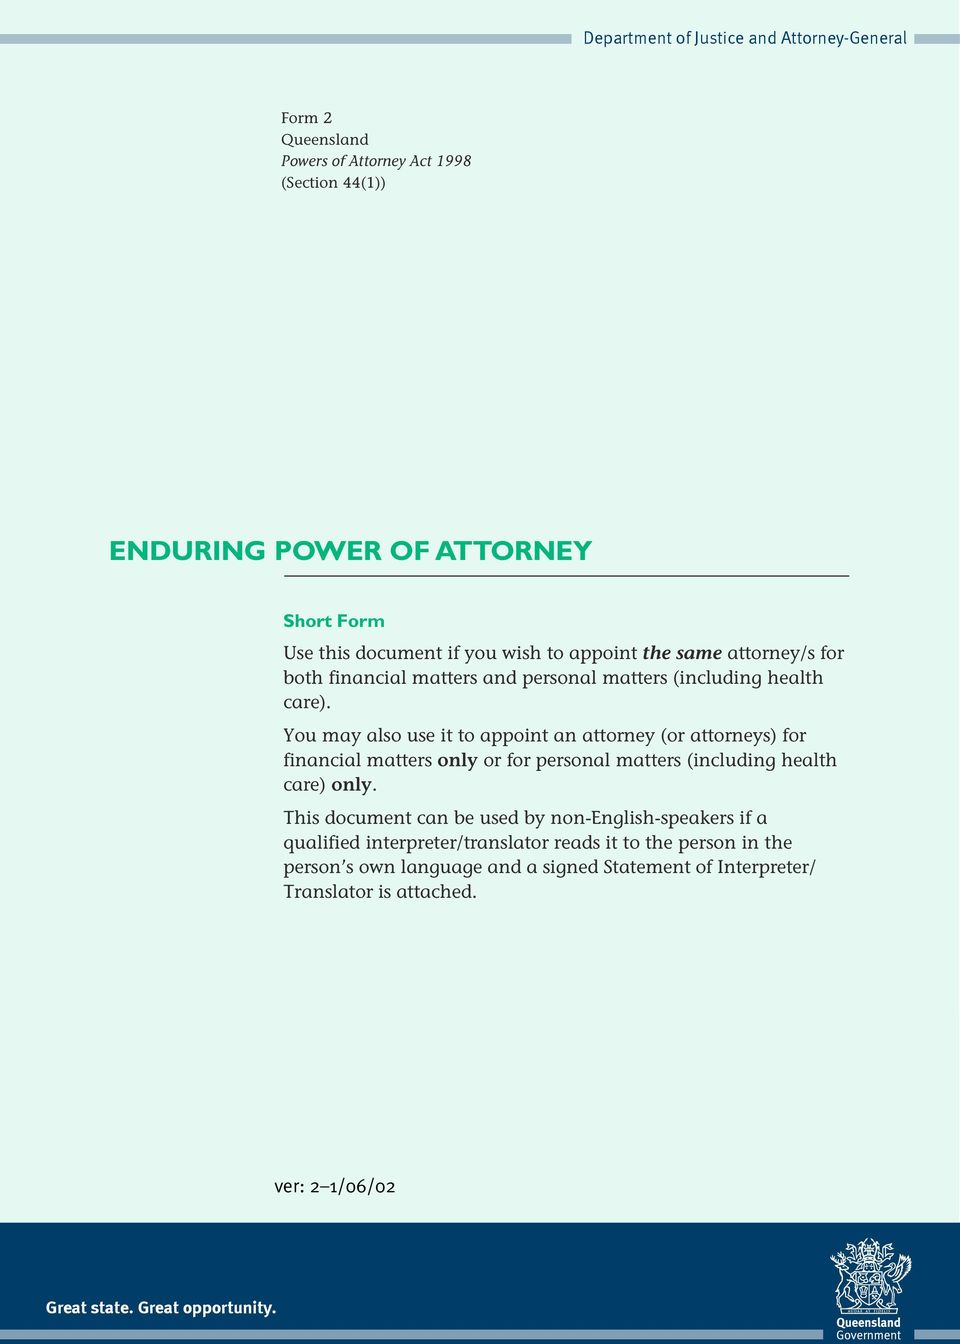 Use this document if you wish to appoint the same attorney/s for You both may financial also use matters it to appoint and personal an attorney matters (or (including attorneys) health for financial